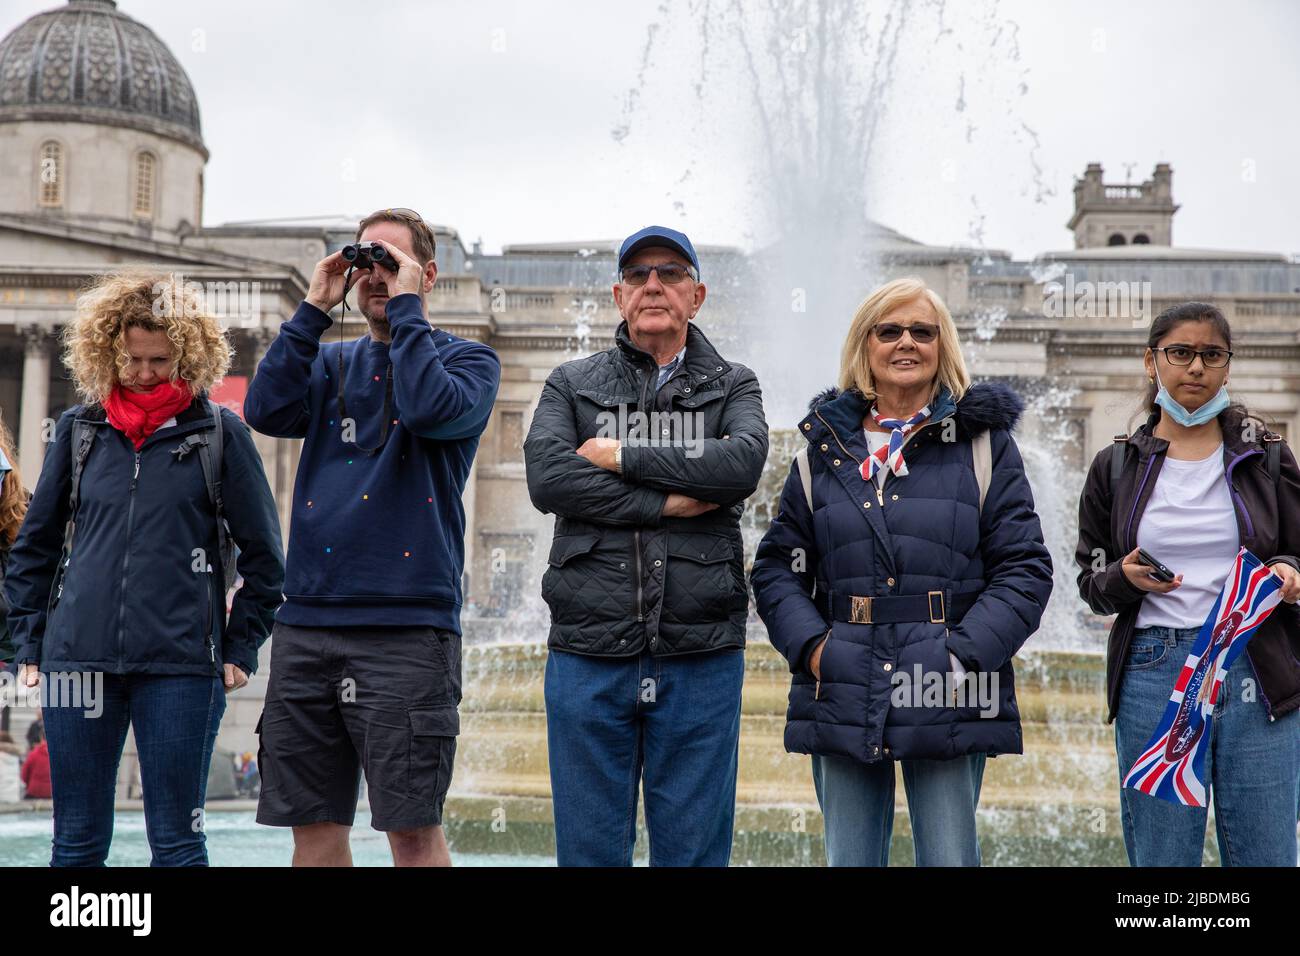 Westminster, London, UK. 5 June 2022. Royal fans congregate in the Mall and Trafalgar Square near Buckingham Palace to celebrate Her Majesty Queen Elizabeth II Platinum Jubilee. This is a weekend marking The Queen’s 70 years reign. Stock Photo